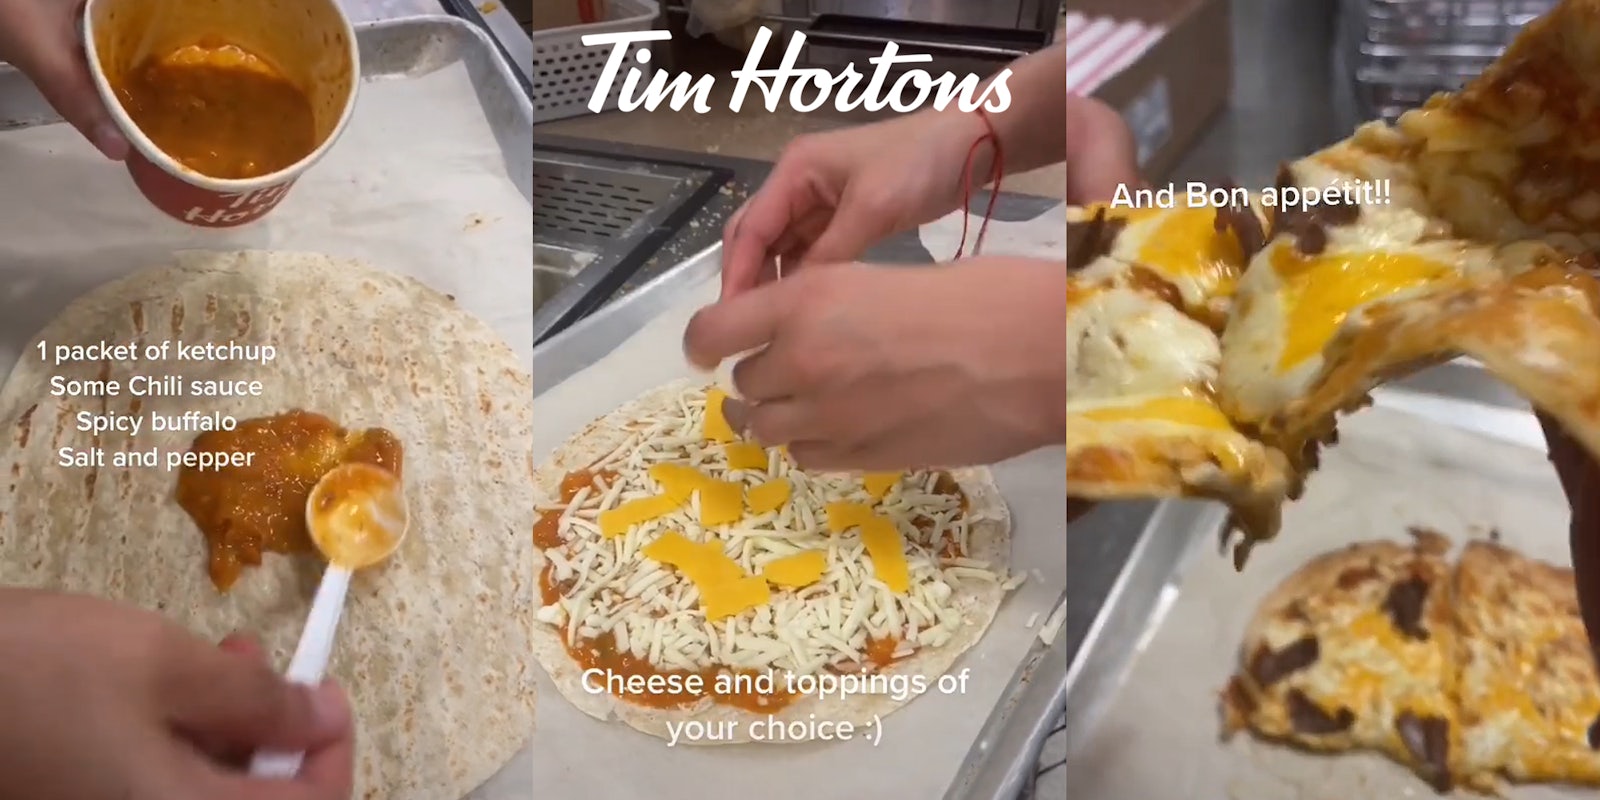 Tim Horton's employee spooning sauce onto pizza dough with caption '1 packet of ketchup Some chili sauce Spicy Buffalo Salt and pepper' (l) Tim Horton's employee adding cheese and toppings to pizza with caption 'Cheese and toppings of your choice :)' with Tim Horton's logo above (c) Tim Horton's employees clinking pizza slices together with caption 'And Bon appetit!!' (r)